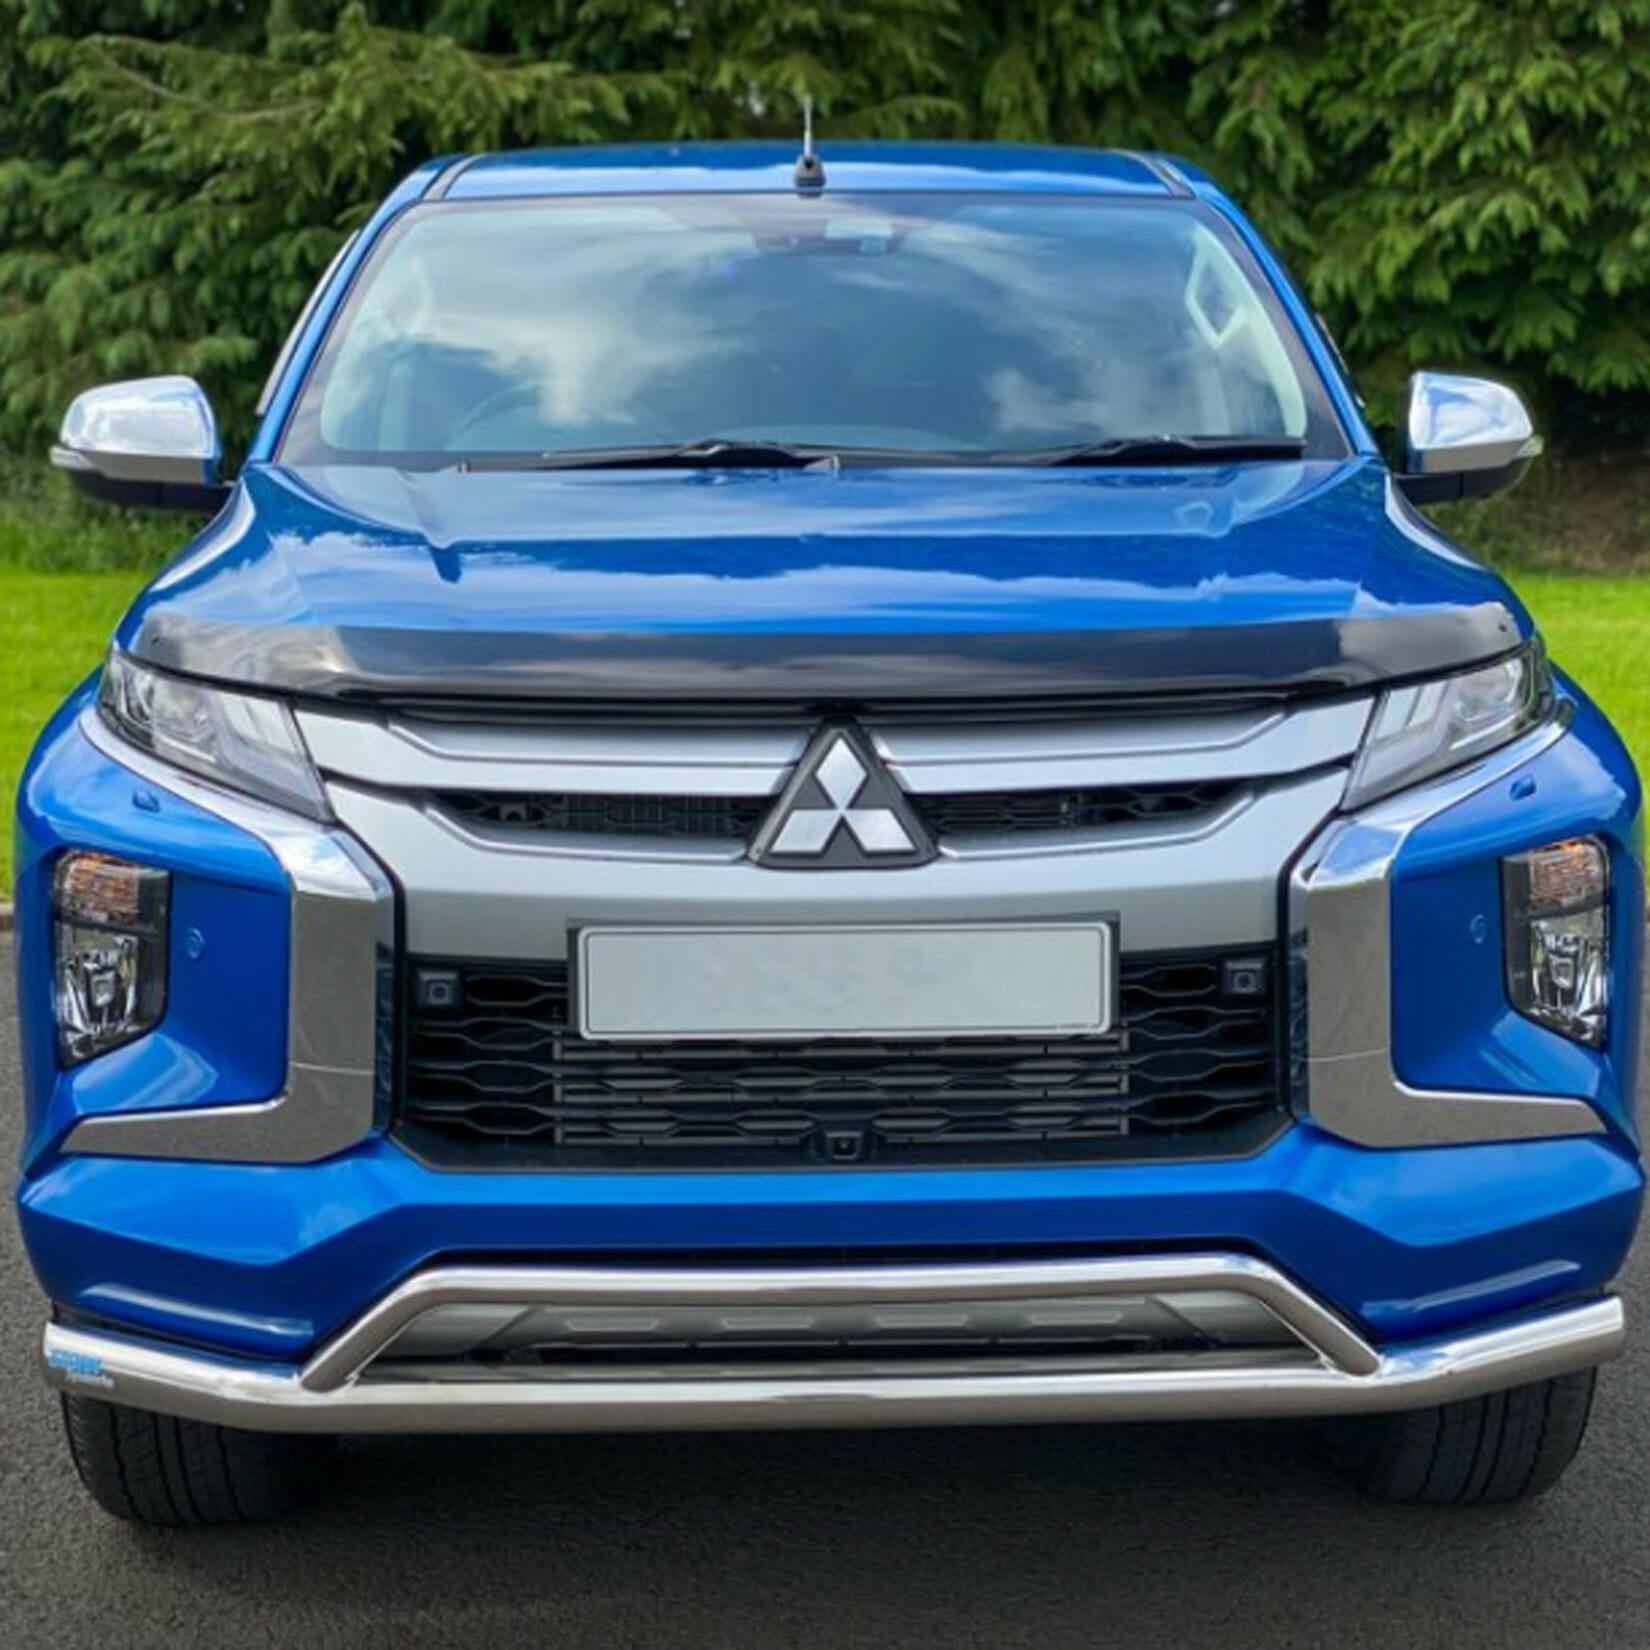 MITSUBISHI L200 SERIES 6 2019 ON – CITY SPOILER BAR - DOUBLE DECK – STAINLESS STEEL - Storm Xccessories2